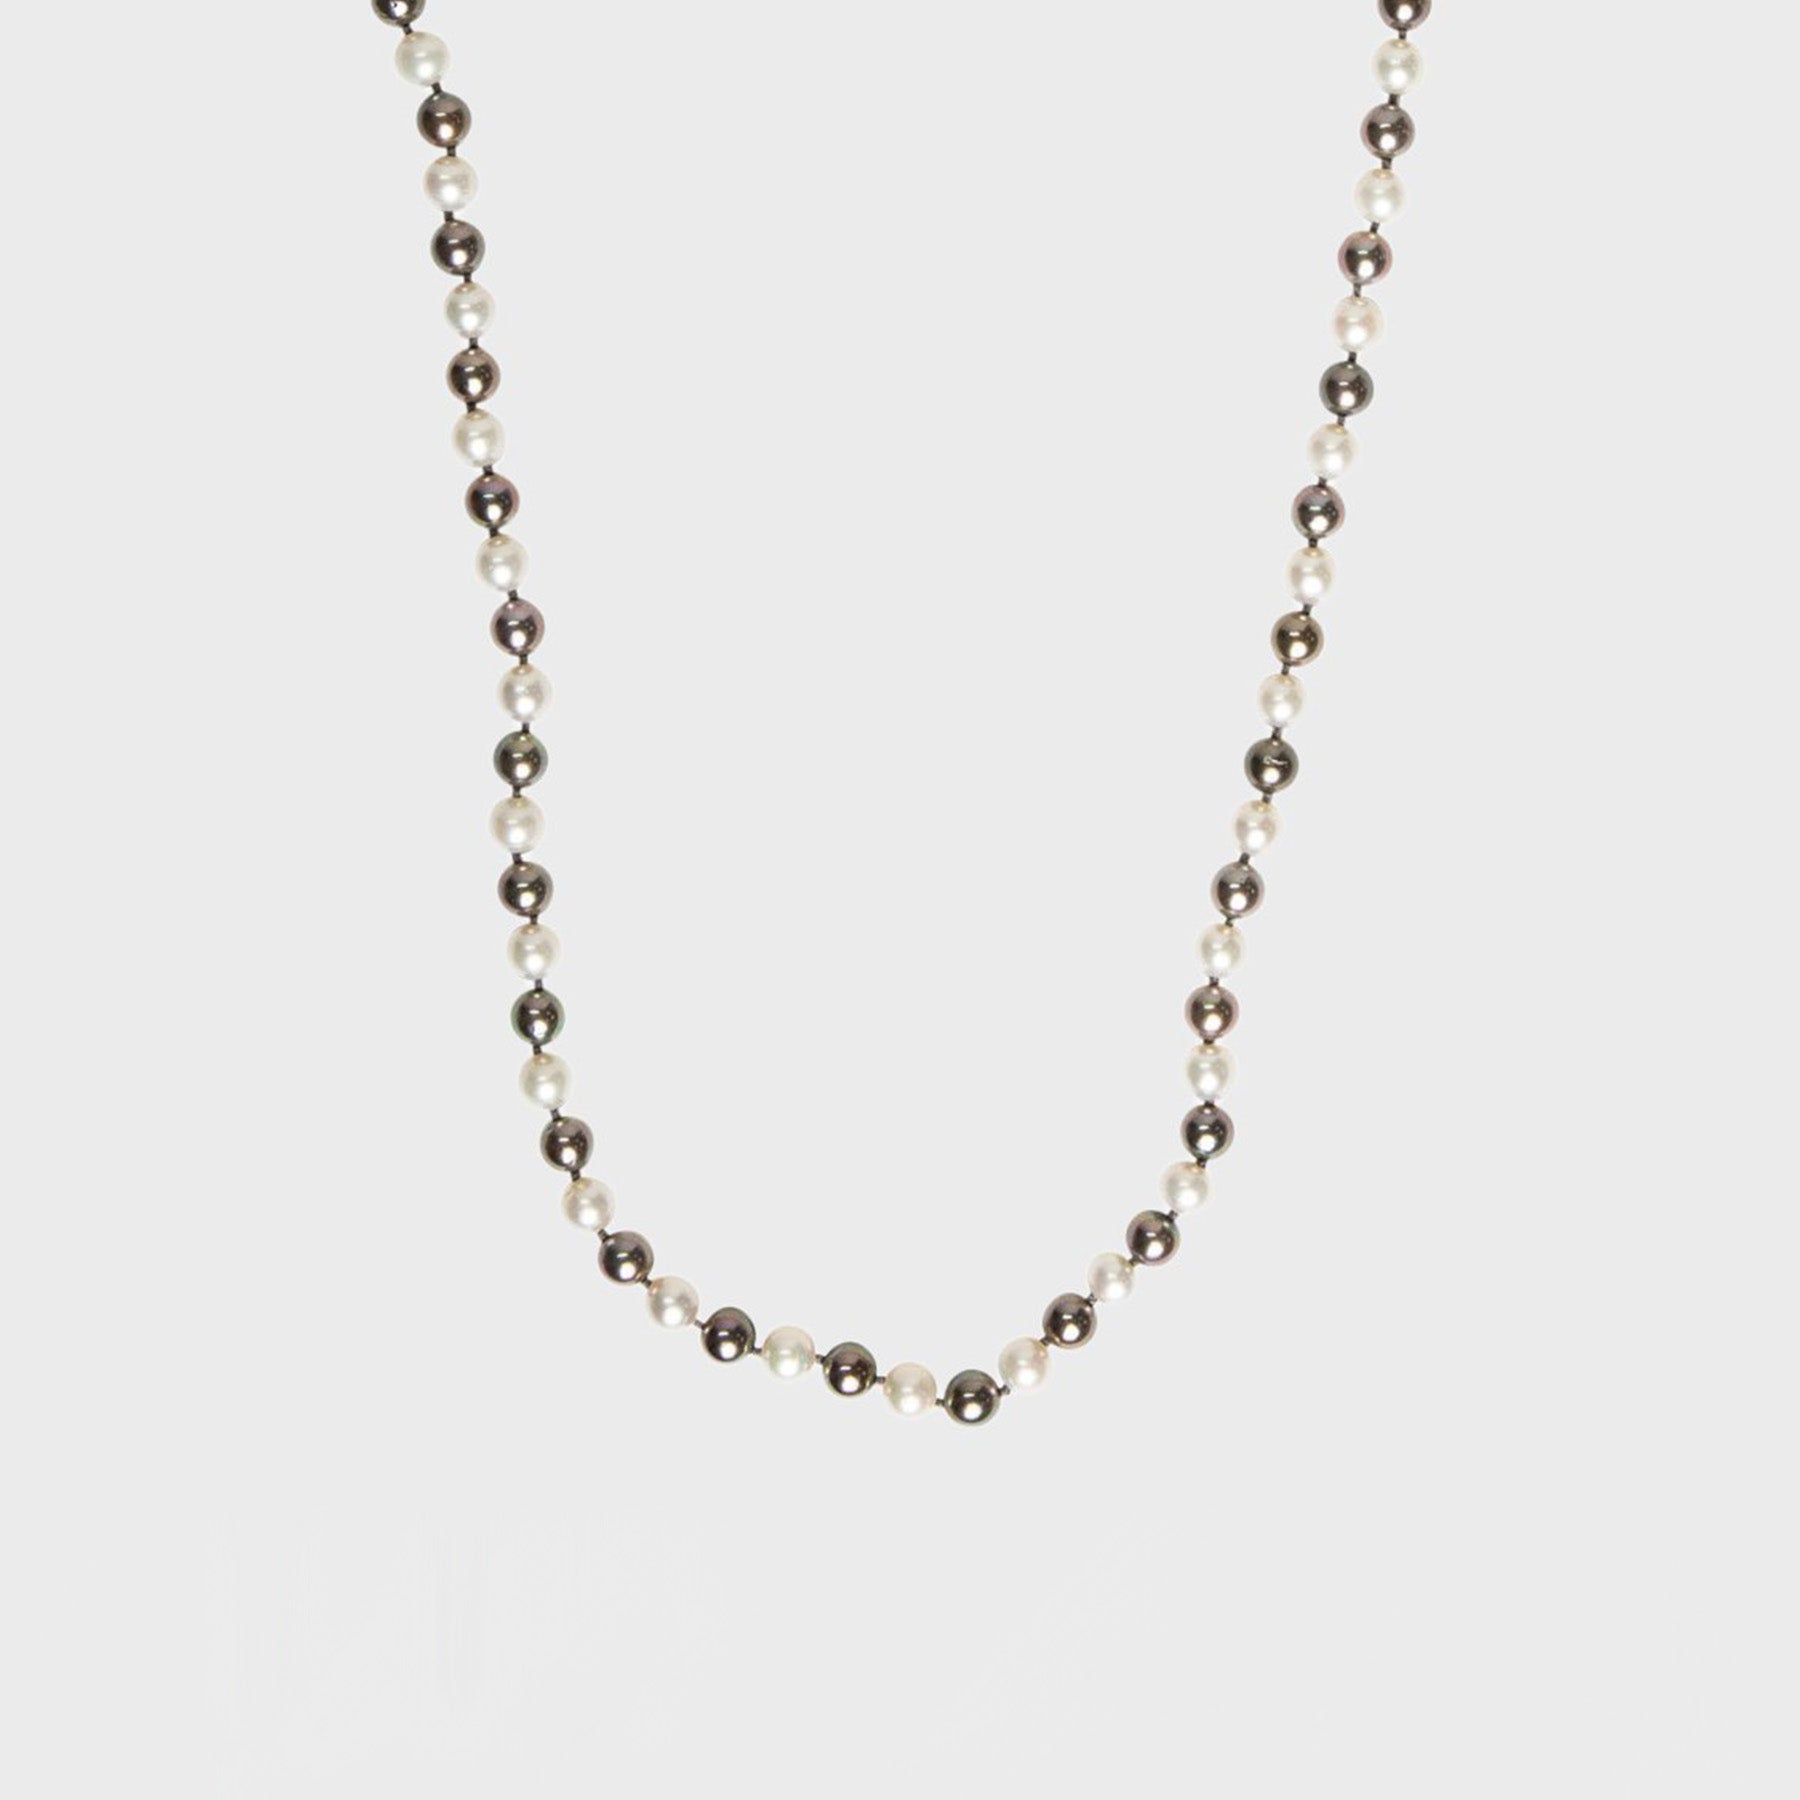 MAXFIELD PRIVATE COLLECTION | MIXED PEARL NECKLACE